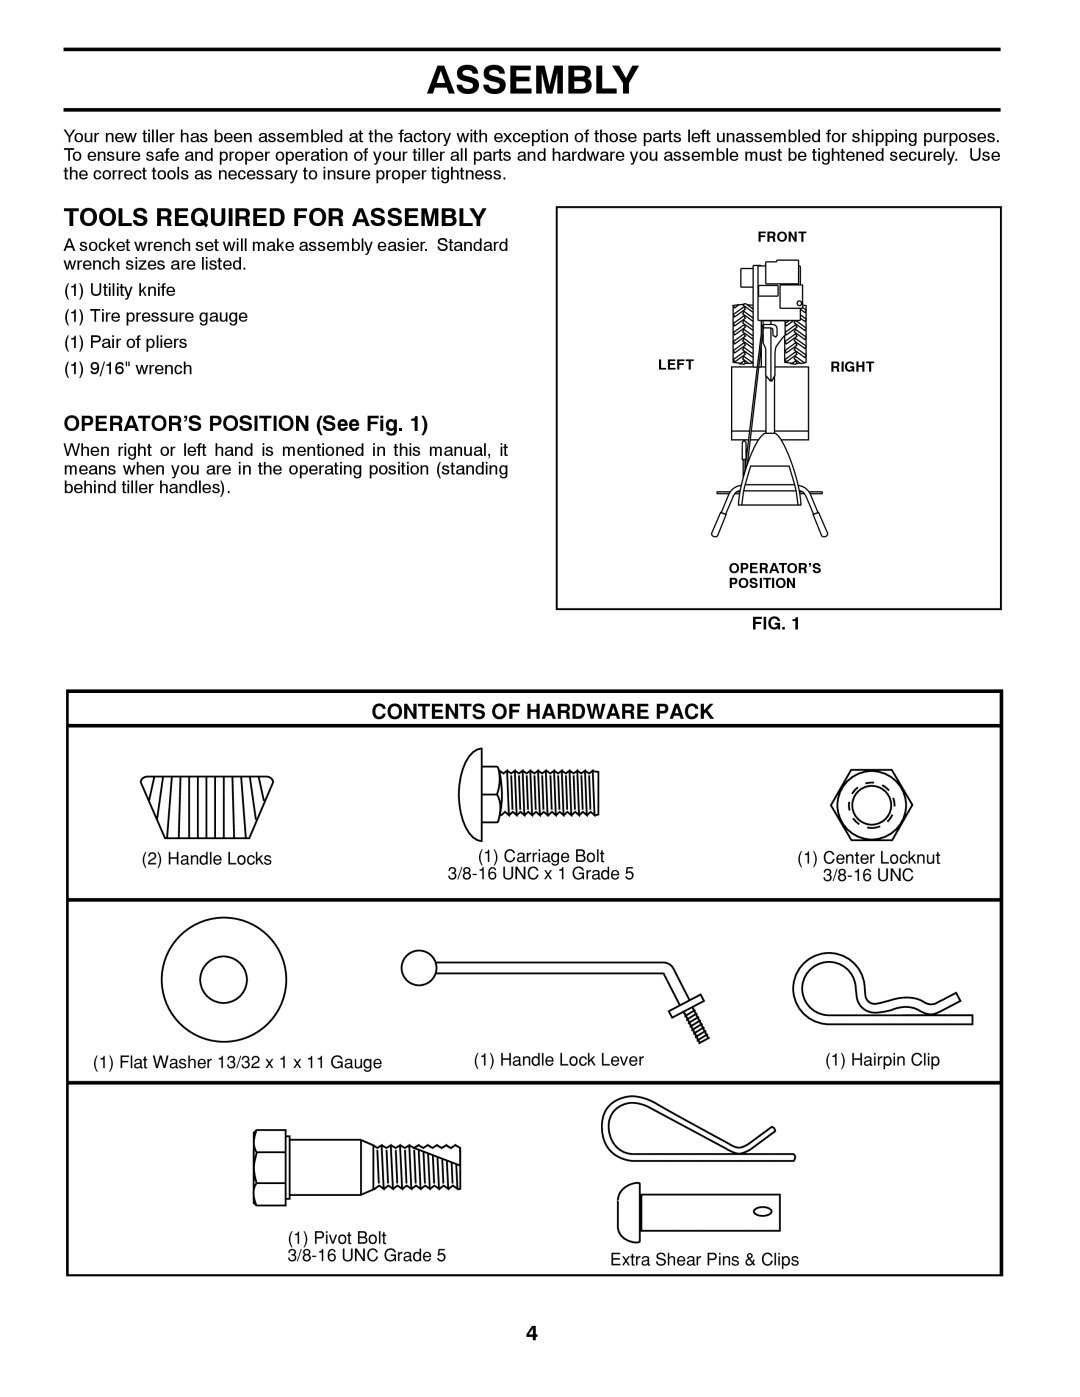 Poulan DRT875 manual Tools Required For Assembly, OPERATOR’S POSITION See Fig, Contents Of Hardware Pack 